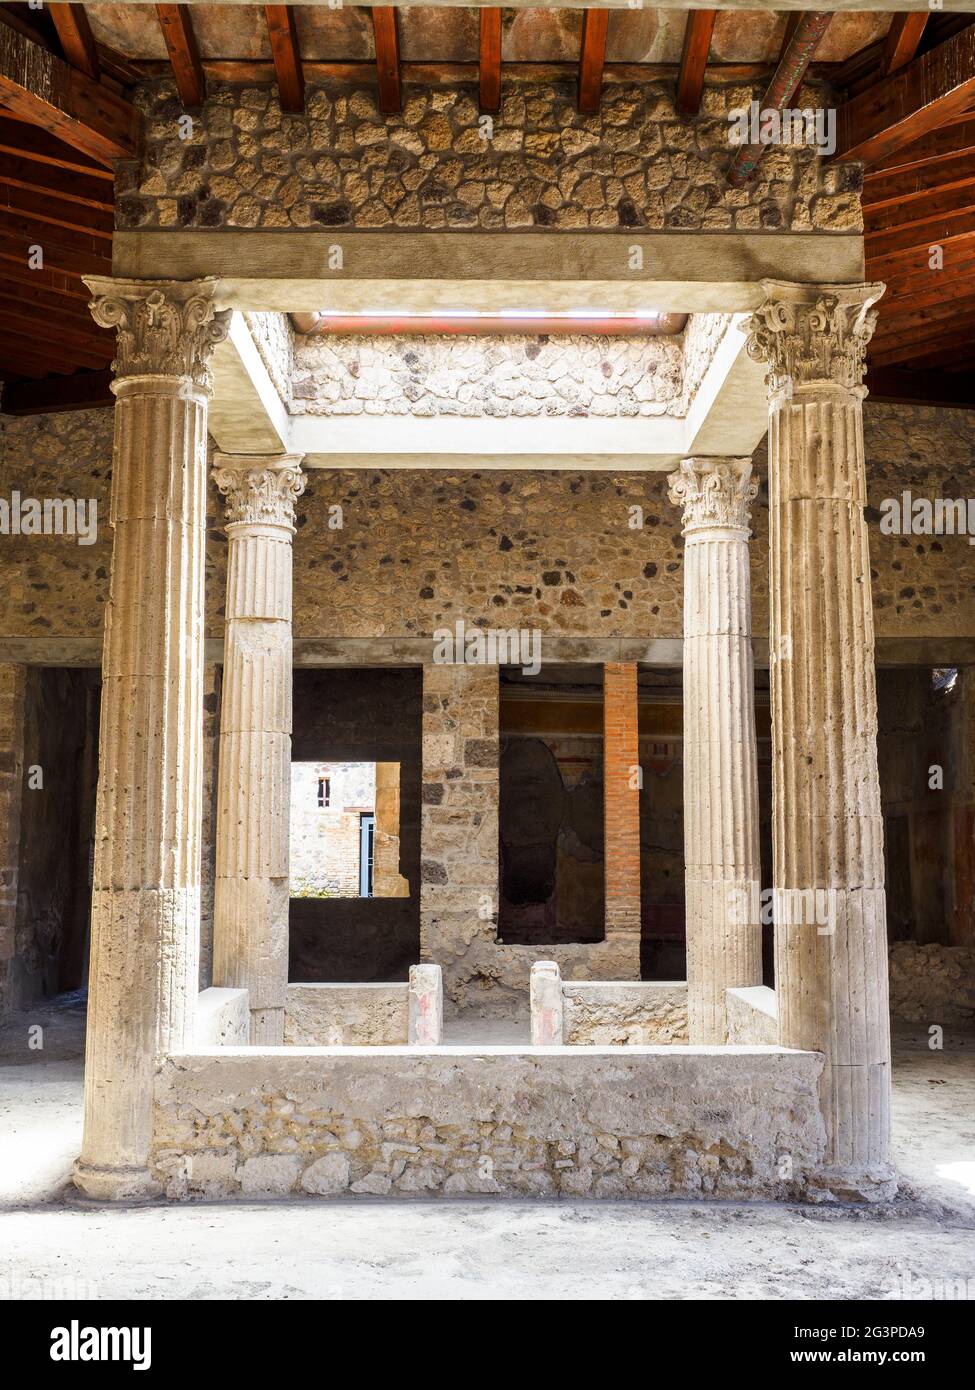 Entrance to the atrium in the House of the Ephebus (Casa dell'efebo) - Pompeii archaeological site, Italy Stock Photo